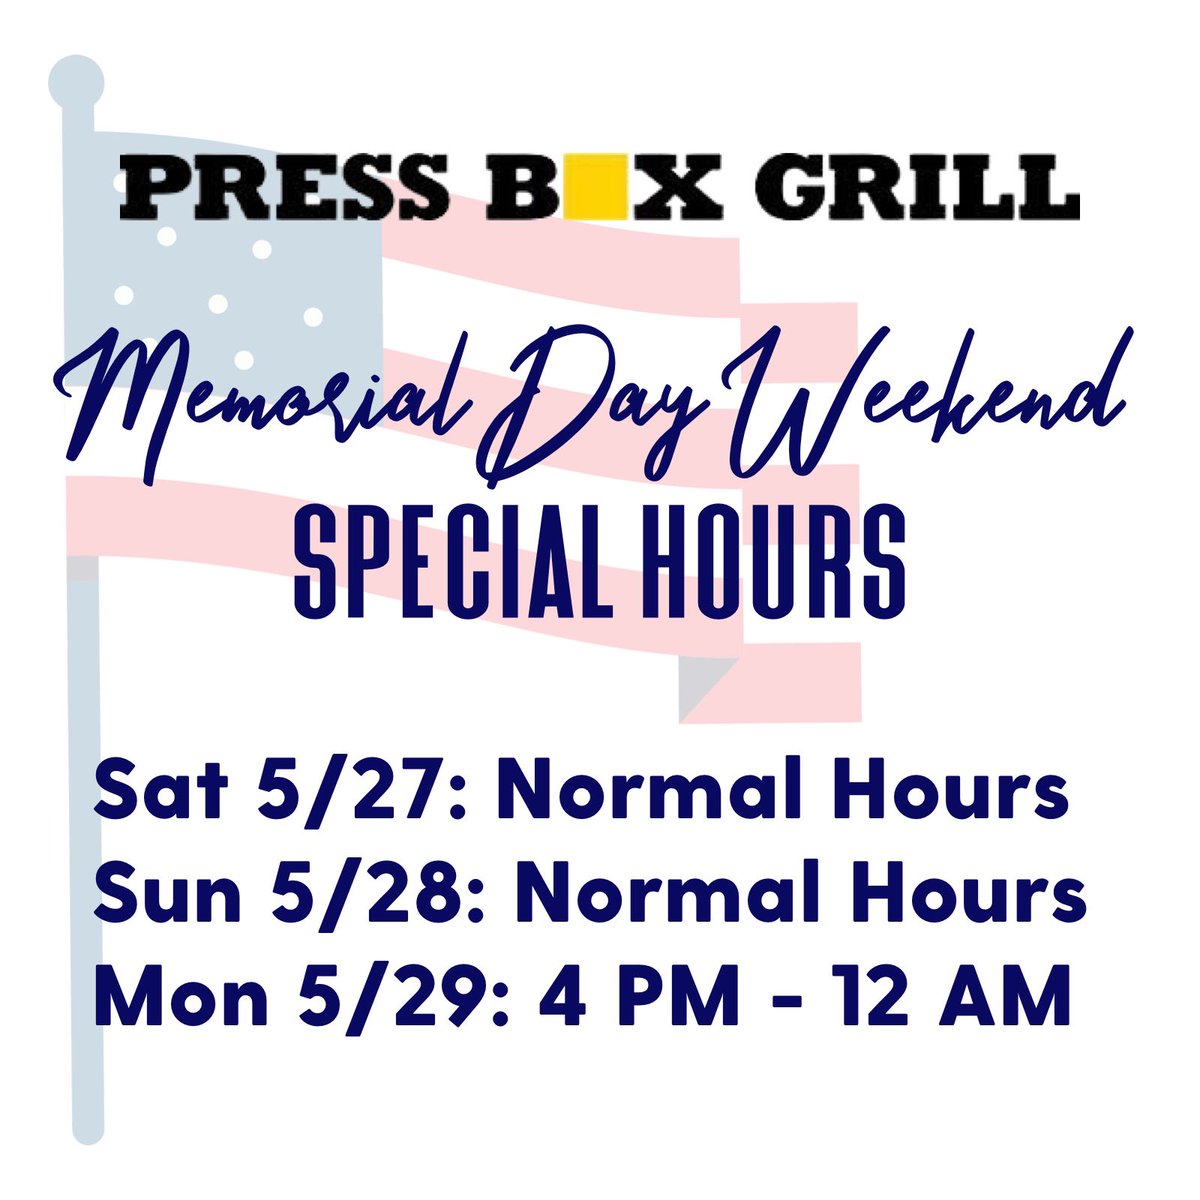 Peep 👀 our special hours this weekend and come hang out with us! We wish everyone a safe and fun Memorial Day Weekend. 🇺🇸 #dallasrestaurants #dallasbars #mydtd #downtowndallas